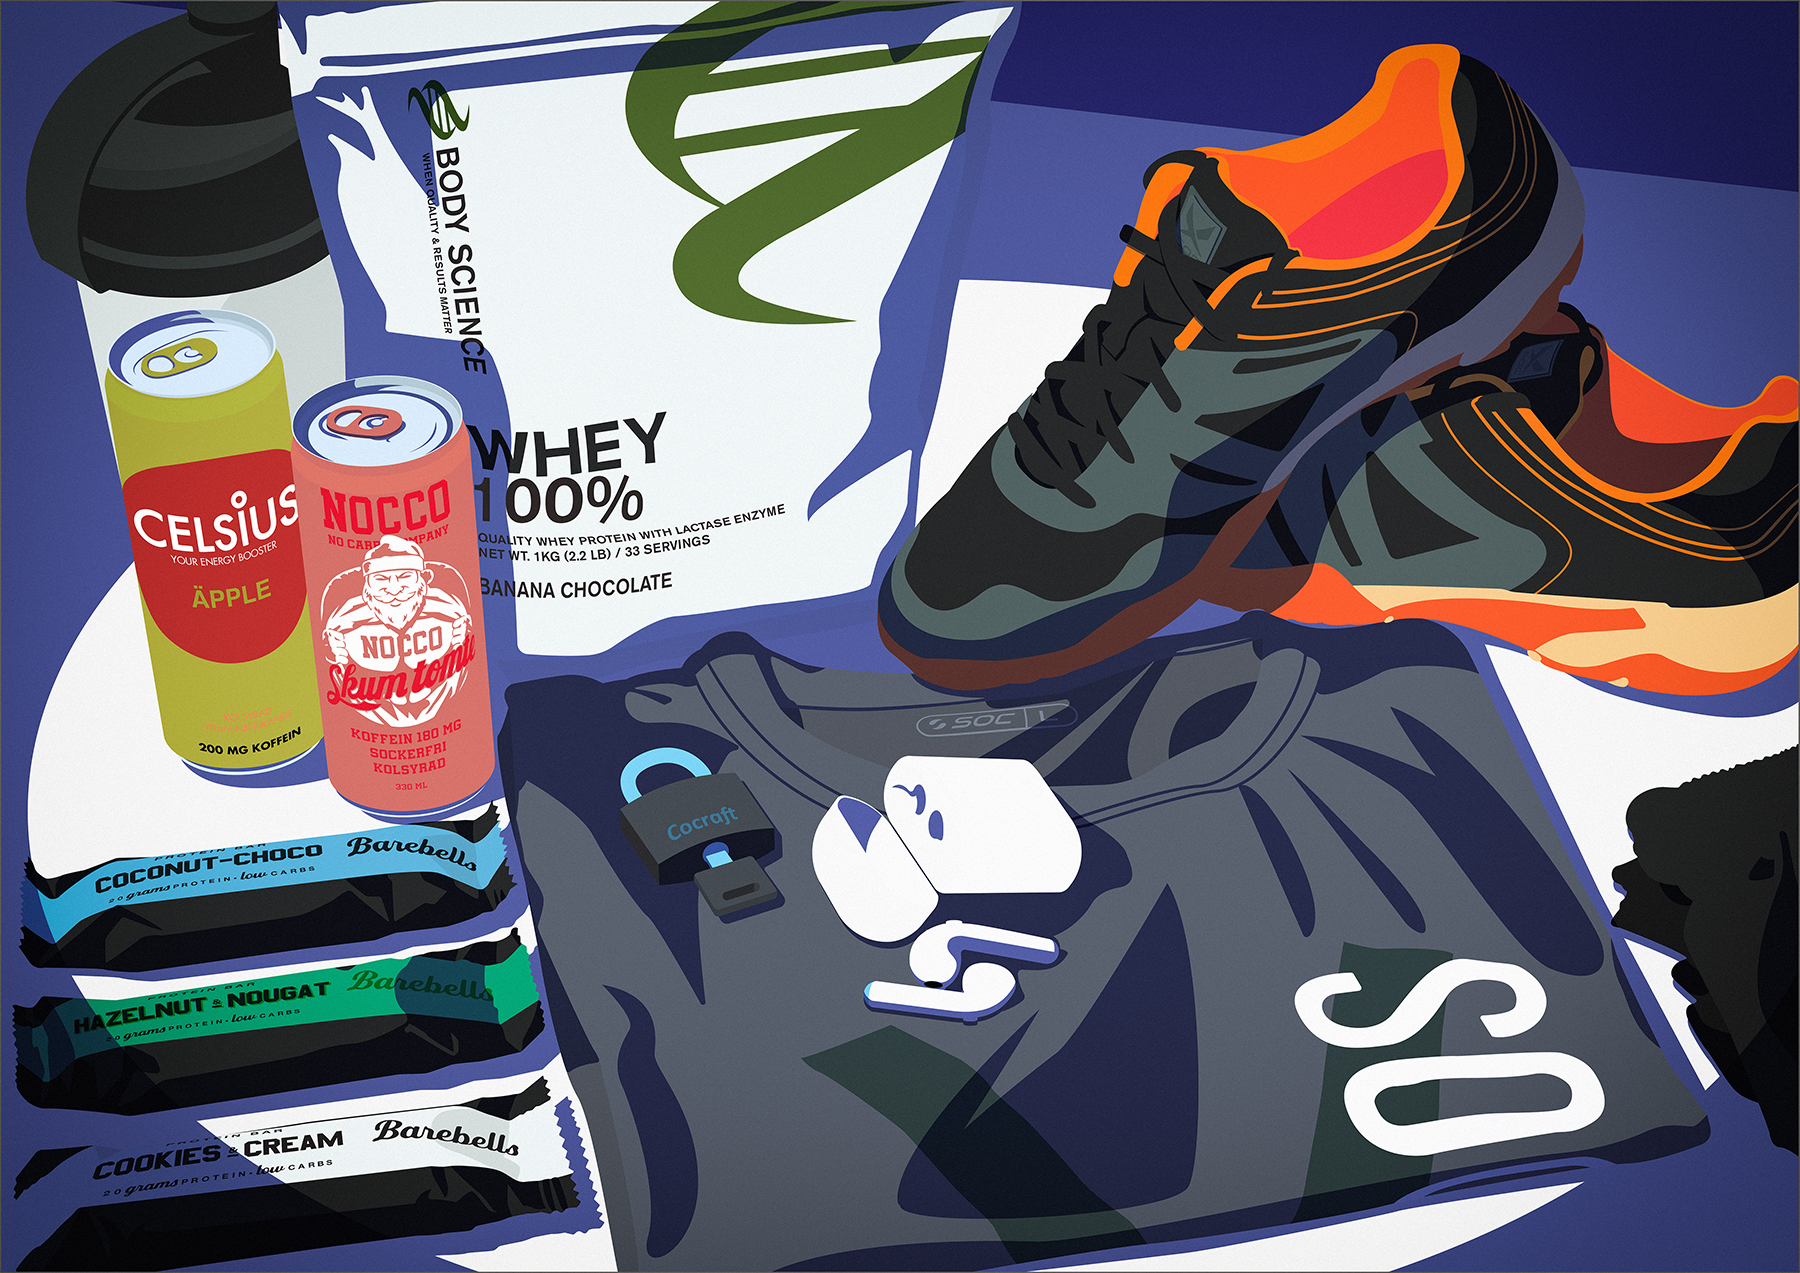 Illustration for a workout kit with objects that comes in handy when training, keeping you fit, working with your fitness, nocco, celsius, soc, shoes, training shoes, headphones, shirt, shorts, energy drinks. 